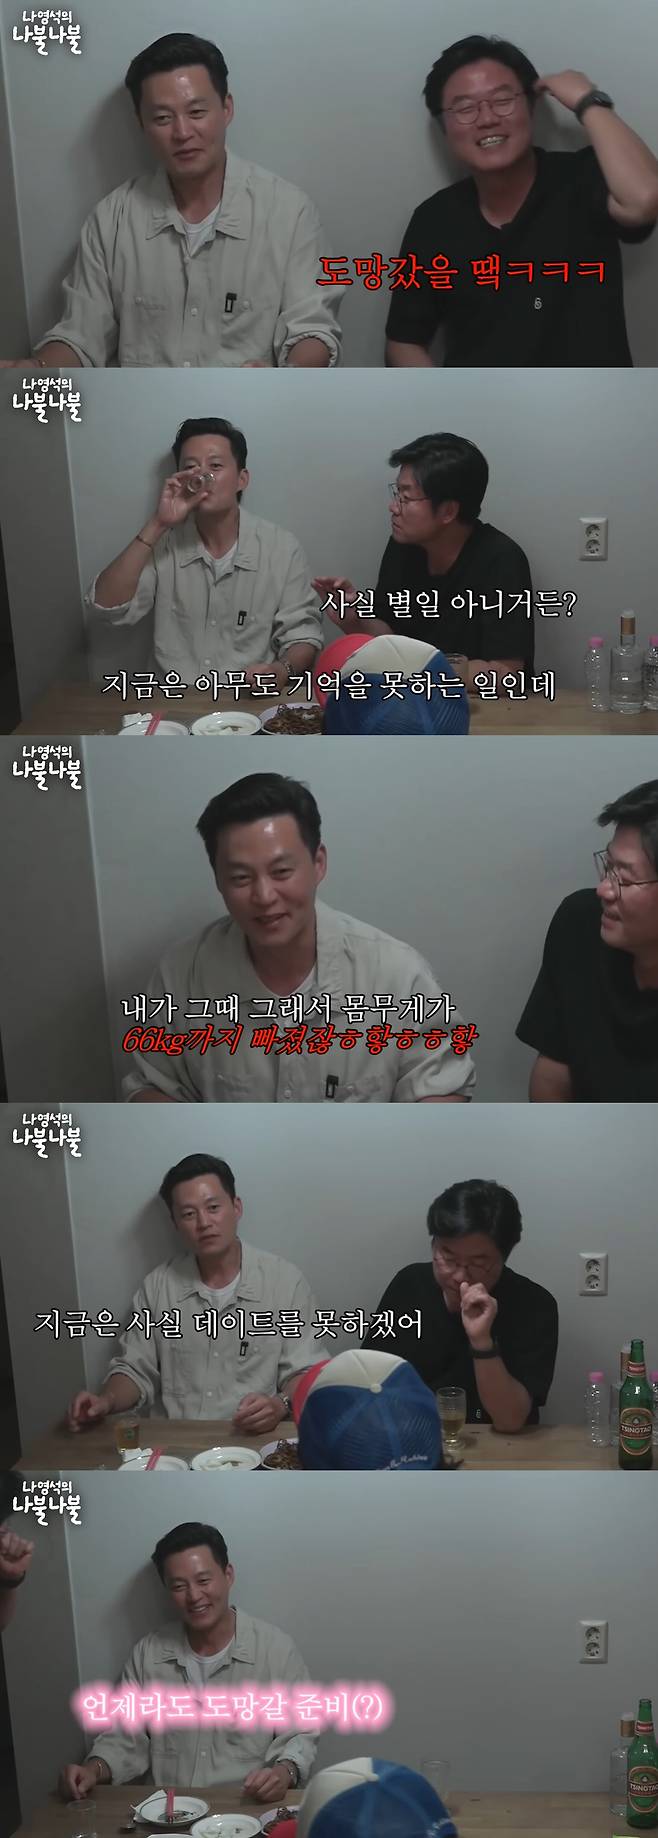 Actor Lee Seo-jin referenced his past with the Hong Kong ChipperOn the second channel Channel Twelve, Lee Seo-jin and Na Young-seok PD talked.On this day, Na Young-seok asked Lee Seo-jin, When Hong Kong Disneyland is compact, he asked, When did you go?Lee Seo-jin said, The Hundred-Year-Old Man Who Climbed Out the went and went with his nephew.Na Young-seok was embarrassed to say, The Hundred-Year-Old Man Who Climbed Out the and another crew member said, Its not really a big deal.Lee Seo-jin continued his public devotion with Kim Jung-Eun who breathed together in SBS lover in 2006 and broke up in 2008.Lee Seo-jin went through a breakup and left for Hong Kong for two months. After that, I did not mention anything about it, but now it was cool to mention it.Lee Seo-jin said, I am clean, there is no violence, and there is nothing. Then I felt comfortable. I thought about not going to Korea and solved everything in Hong Kong. I did not turn on my cell phone, I turned on my Hong Kong cell phone.I stayed for a little over two months. I also learned golf. There was a club right in front of me, but I didnt want to go, so I went to the bar alone and drank beer.There was a DVD player in the gym in the neighborhood. I spent three hours aerobic exercise watching the DVD. I kept working out because I was curious about the next one. Then I lost up to 66 kilograms, he added.Na Young-seok said, I was worried about how I should live, but I was exercising while watching a movie. Lee Seo-jin said, I lost weight and got better. I was in my late thirties.It was the biggest crisis of my entire life. I was always ready to emigrate, so that I could quickly find my footing even if I had to go in a hurry.Lee Seo-jin said, I do not want to get married. Actually, its a problem because I can not date. Its too annoying. I have to eat, have a drink, watch a movie and drink coffee.When I was in my 30s, I did it before I went to Hong Kong.